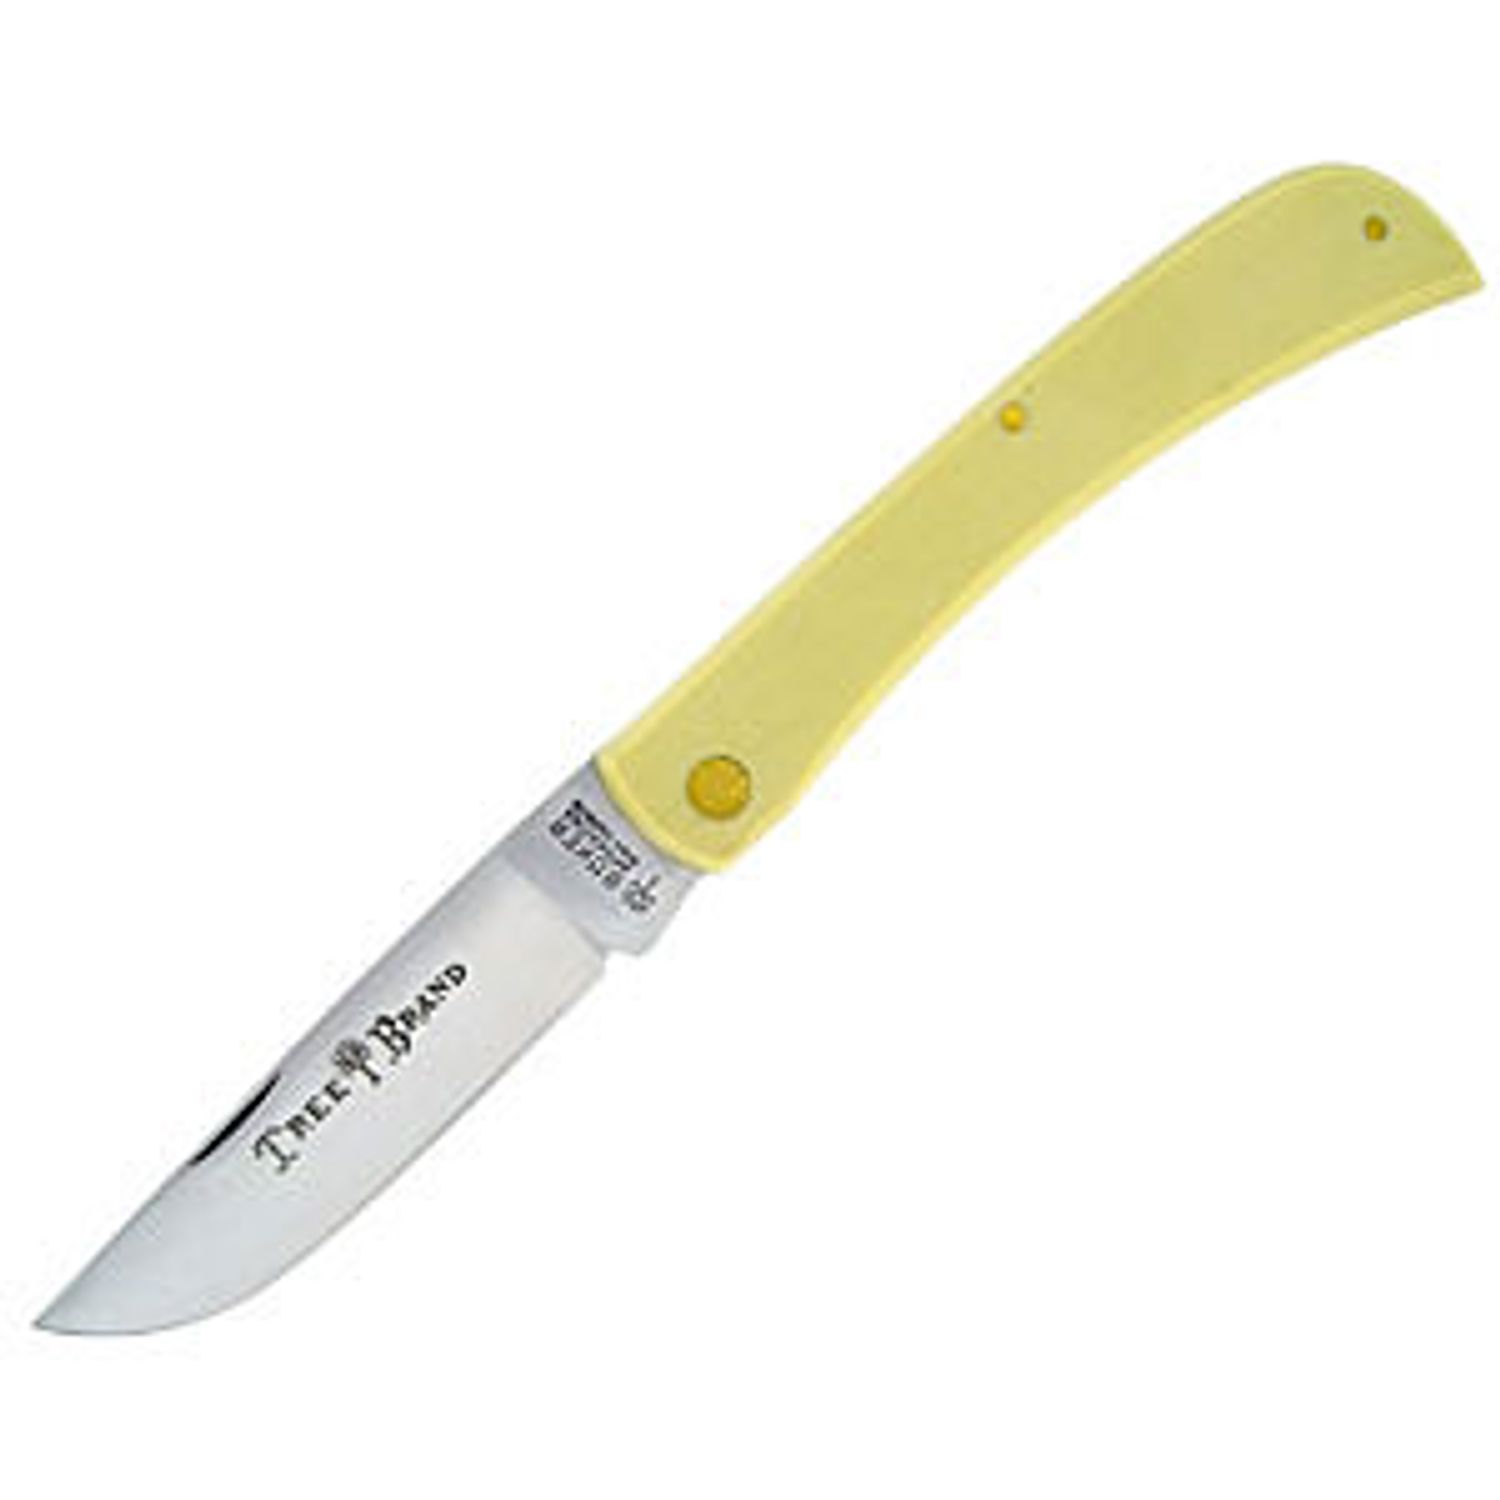 Boker Large Gaucho Sodbuster with Yellow Handle, Plain Edge Blade